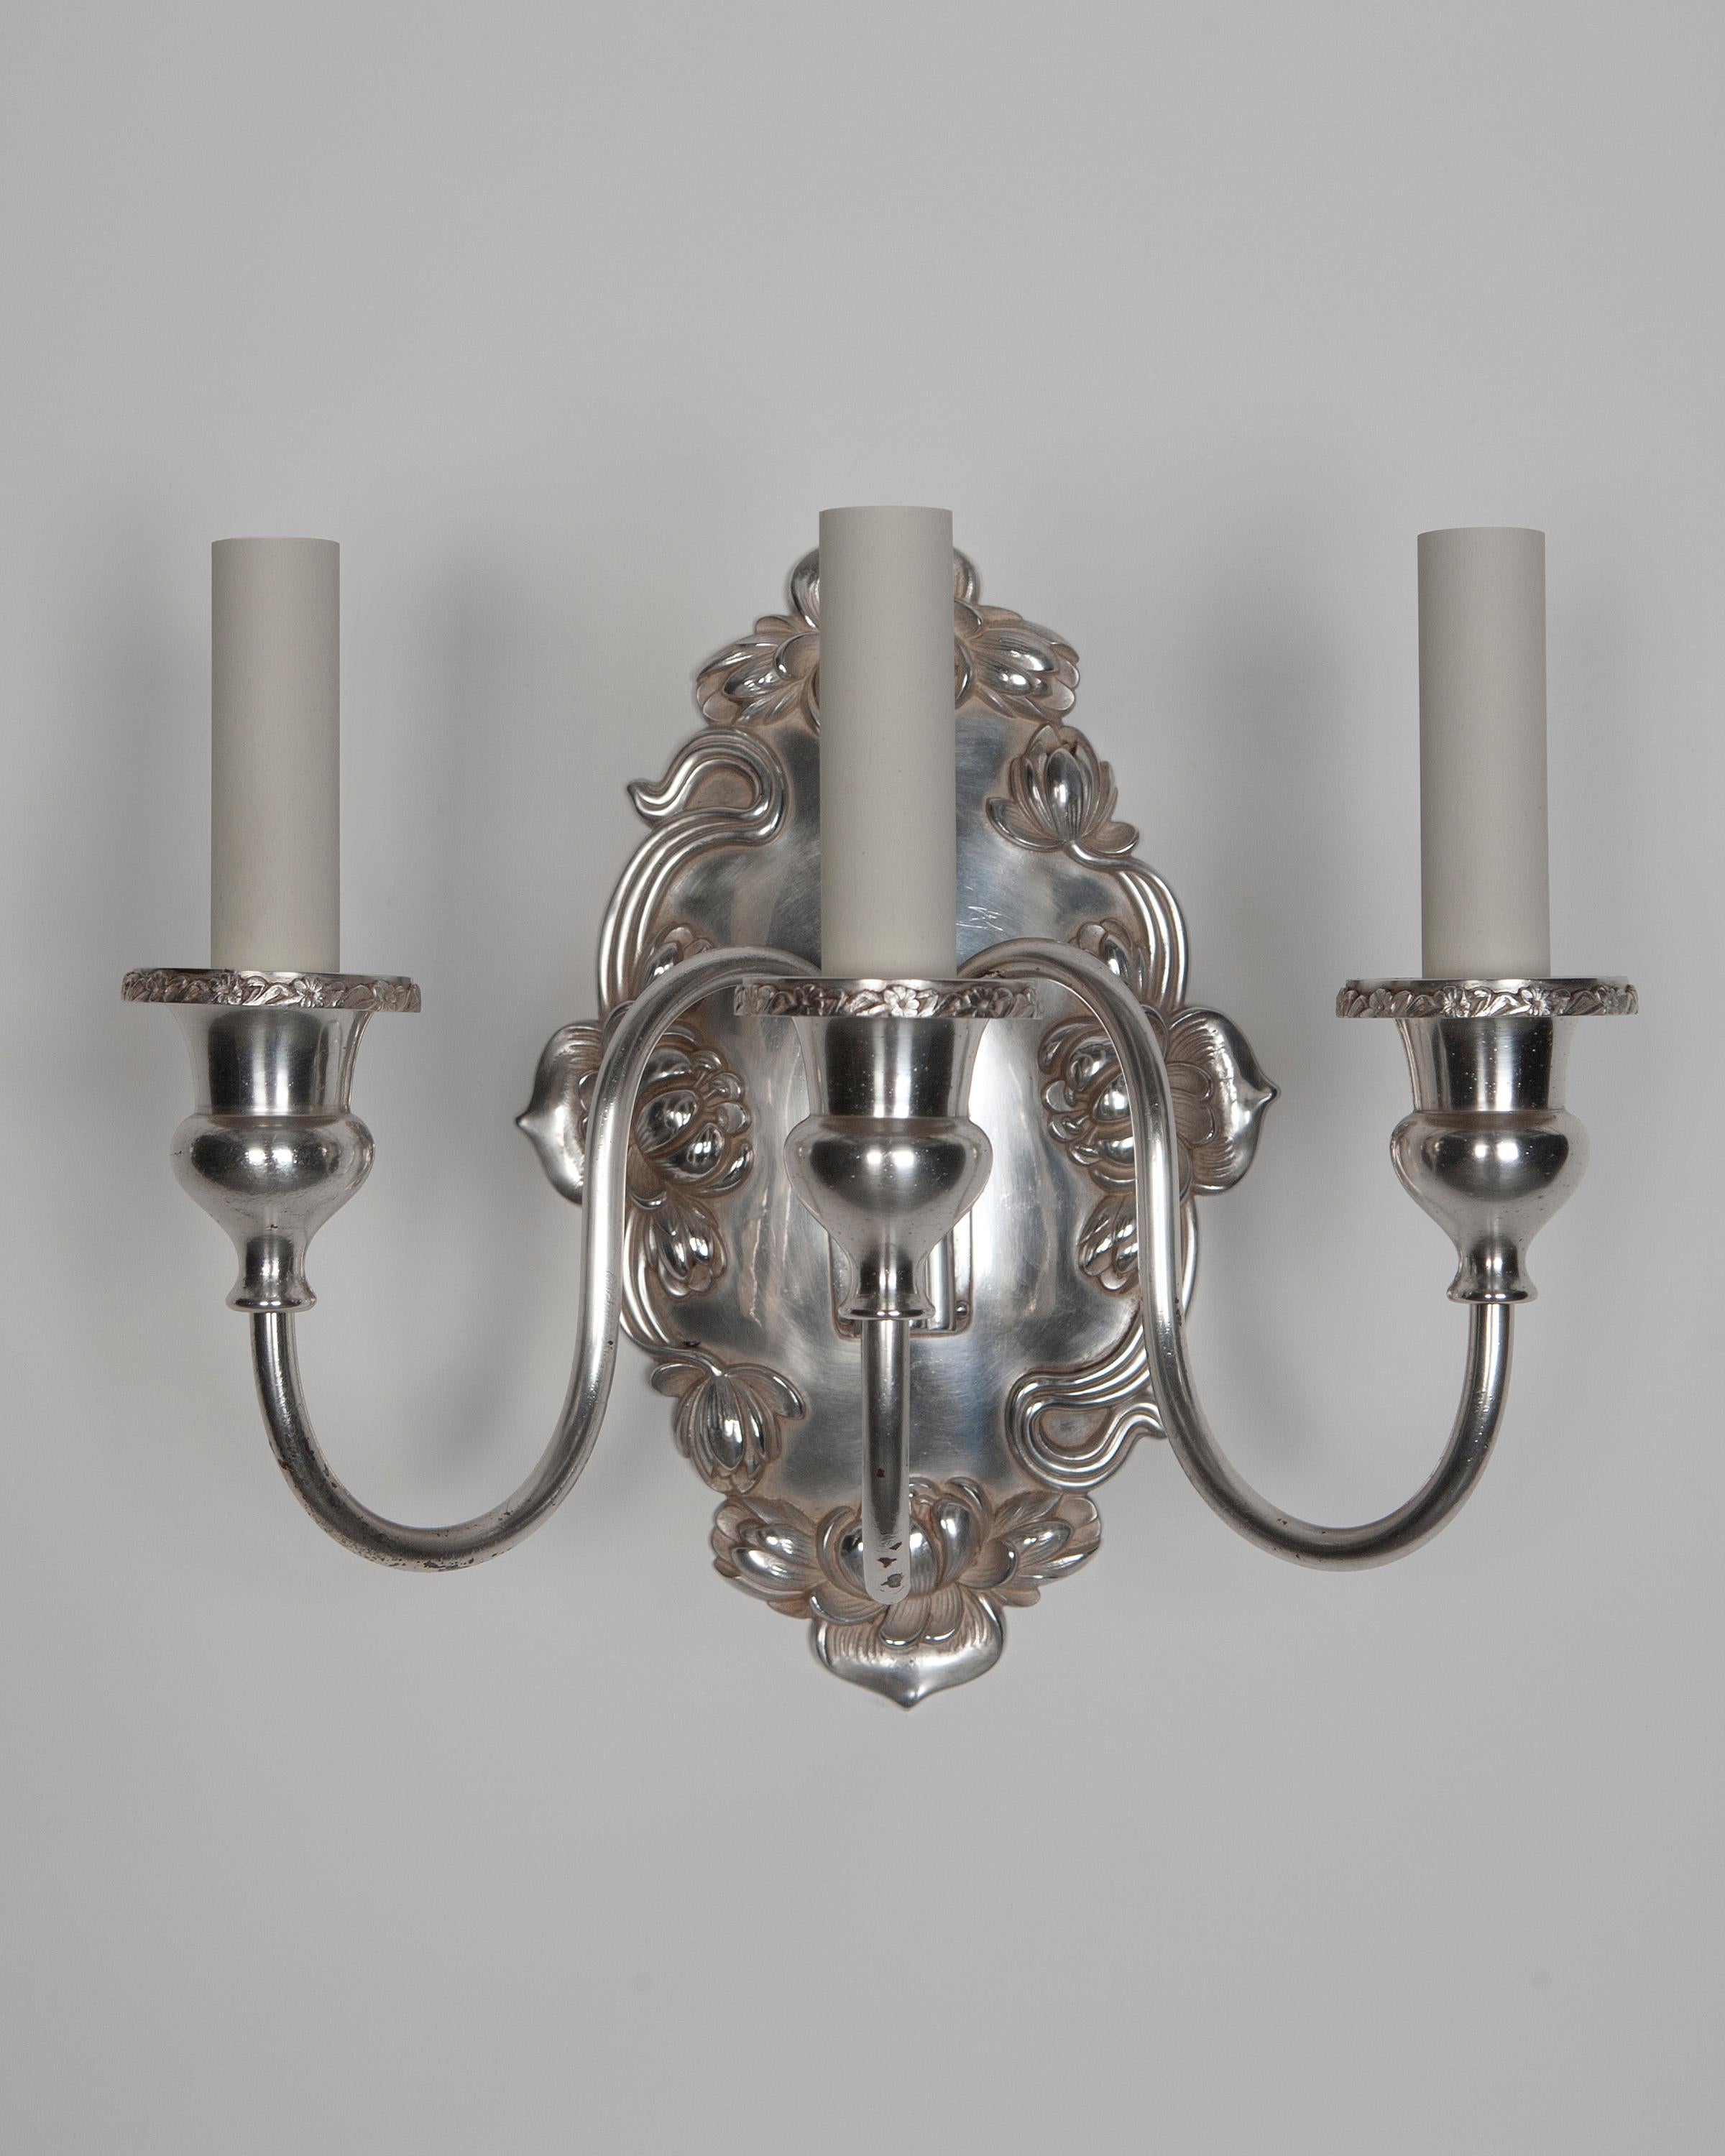 AIS2760

A pair of three light sconces with foliate details in their original silverplate finish. Signed by the New York maker Sterling Bronze Co.

Dimensions:
Overall: 12